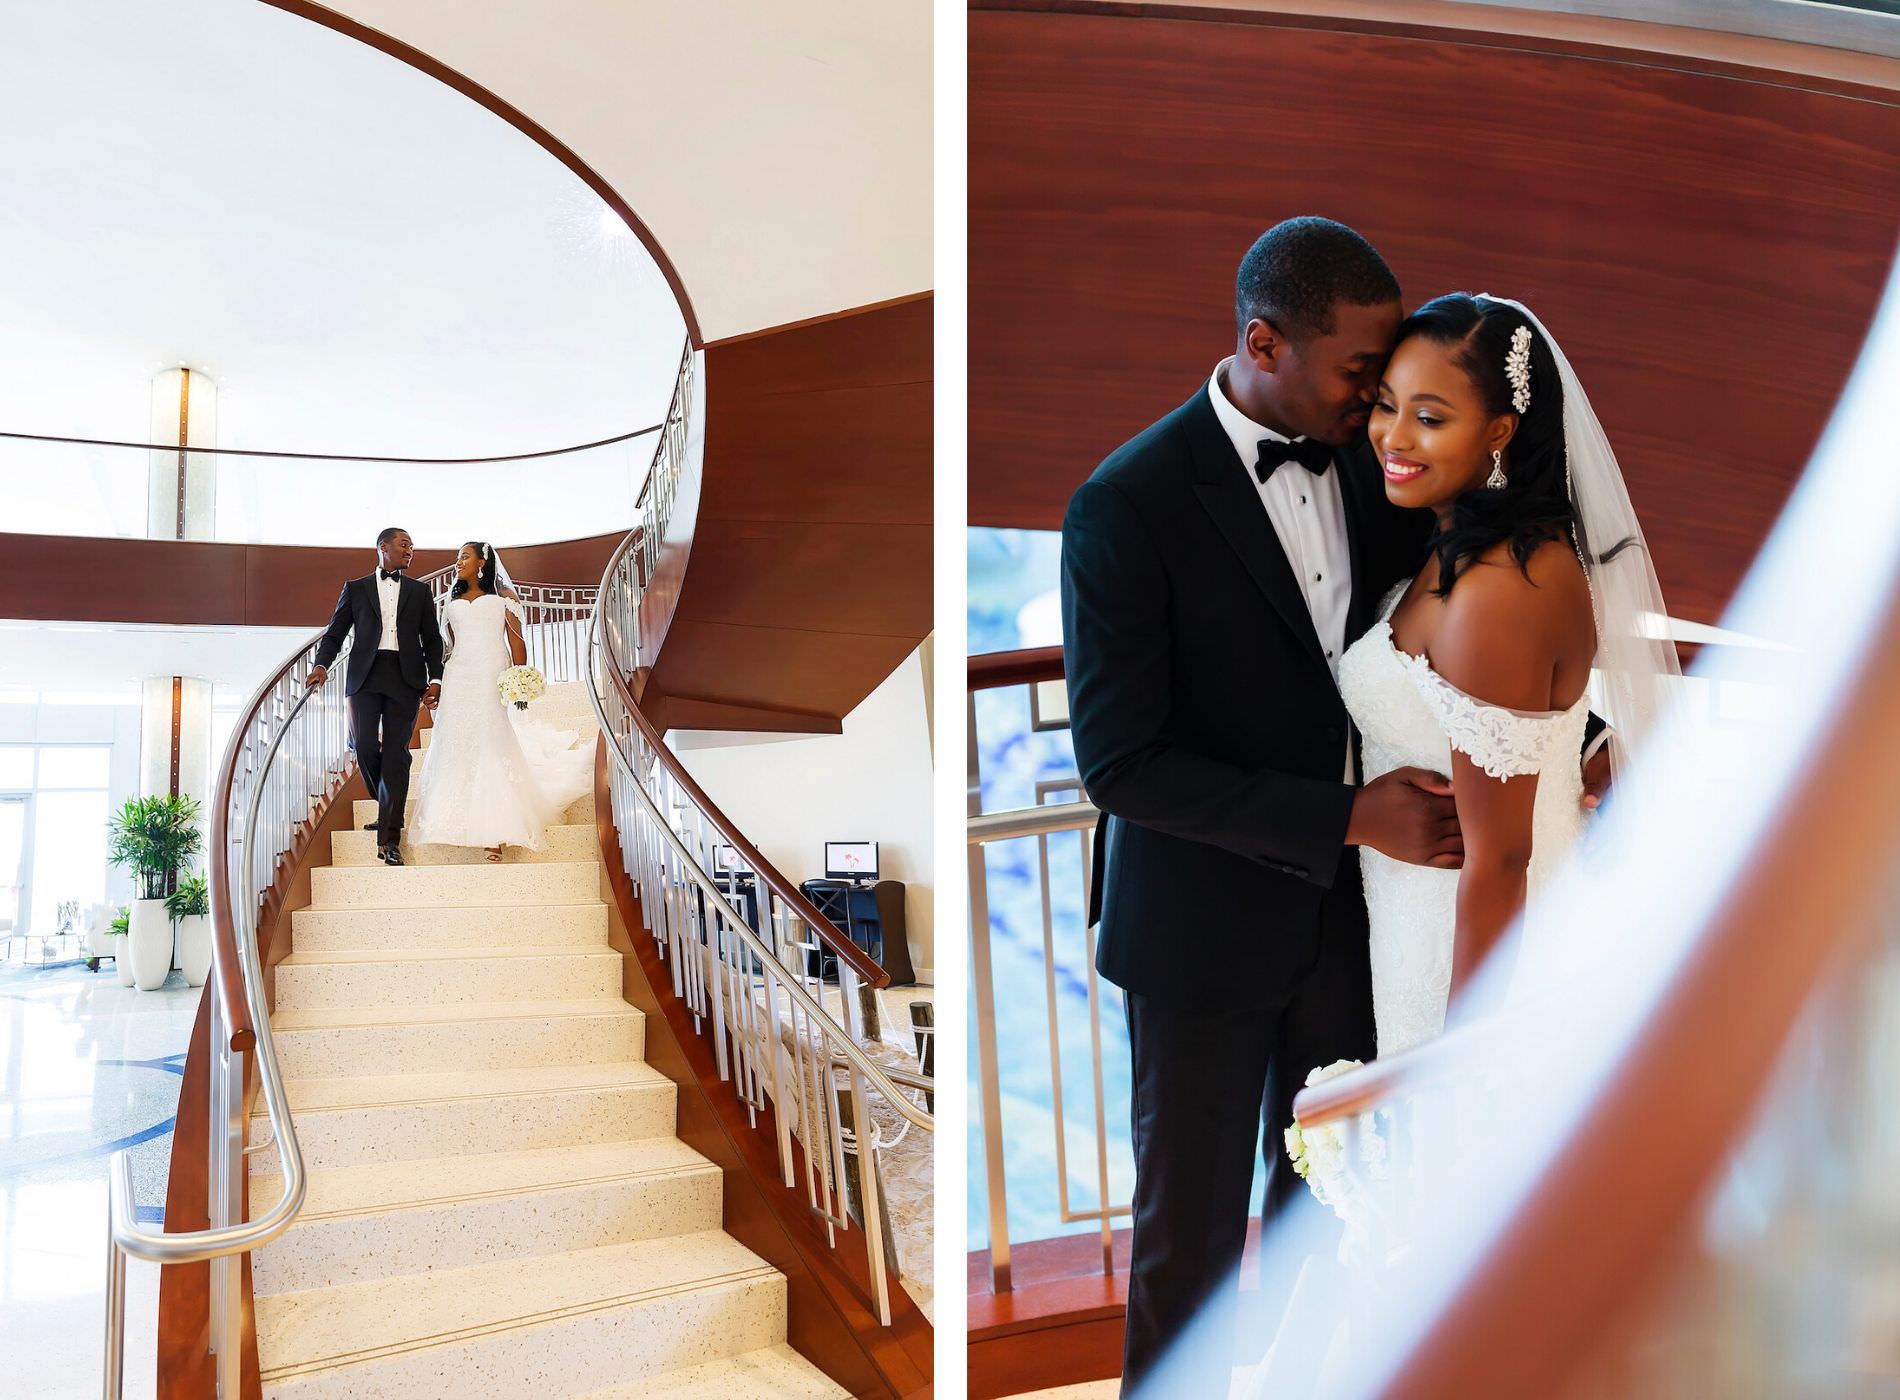 Bride in Romantic Lace Off the Shoulder Wedding Dress Holding Ivory Floral Bouquet First Look Wedding Portrait with Groom on Staircase | Clearwater Beach Wedding Venue Duvall Ballroom Center